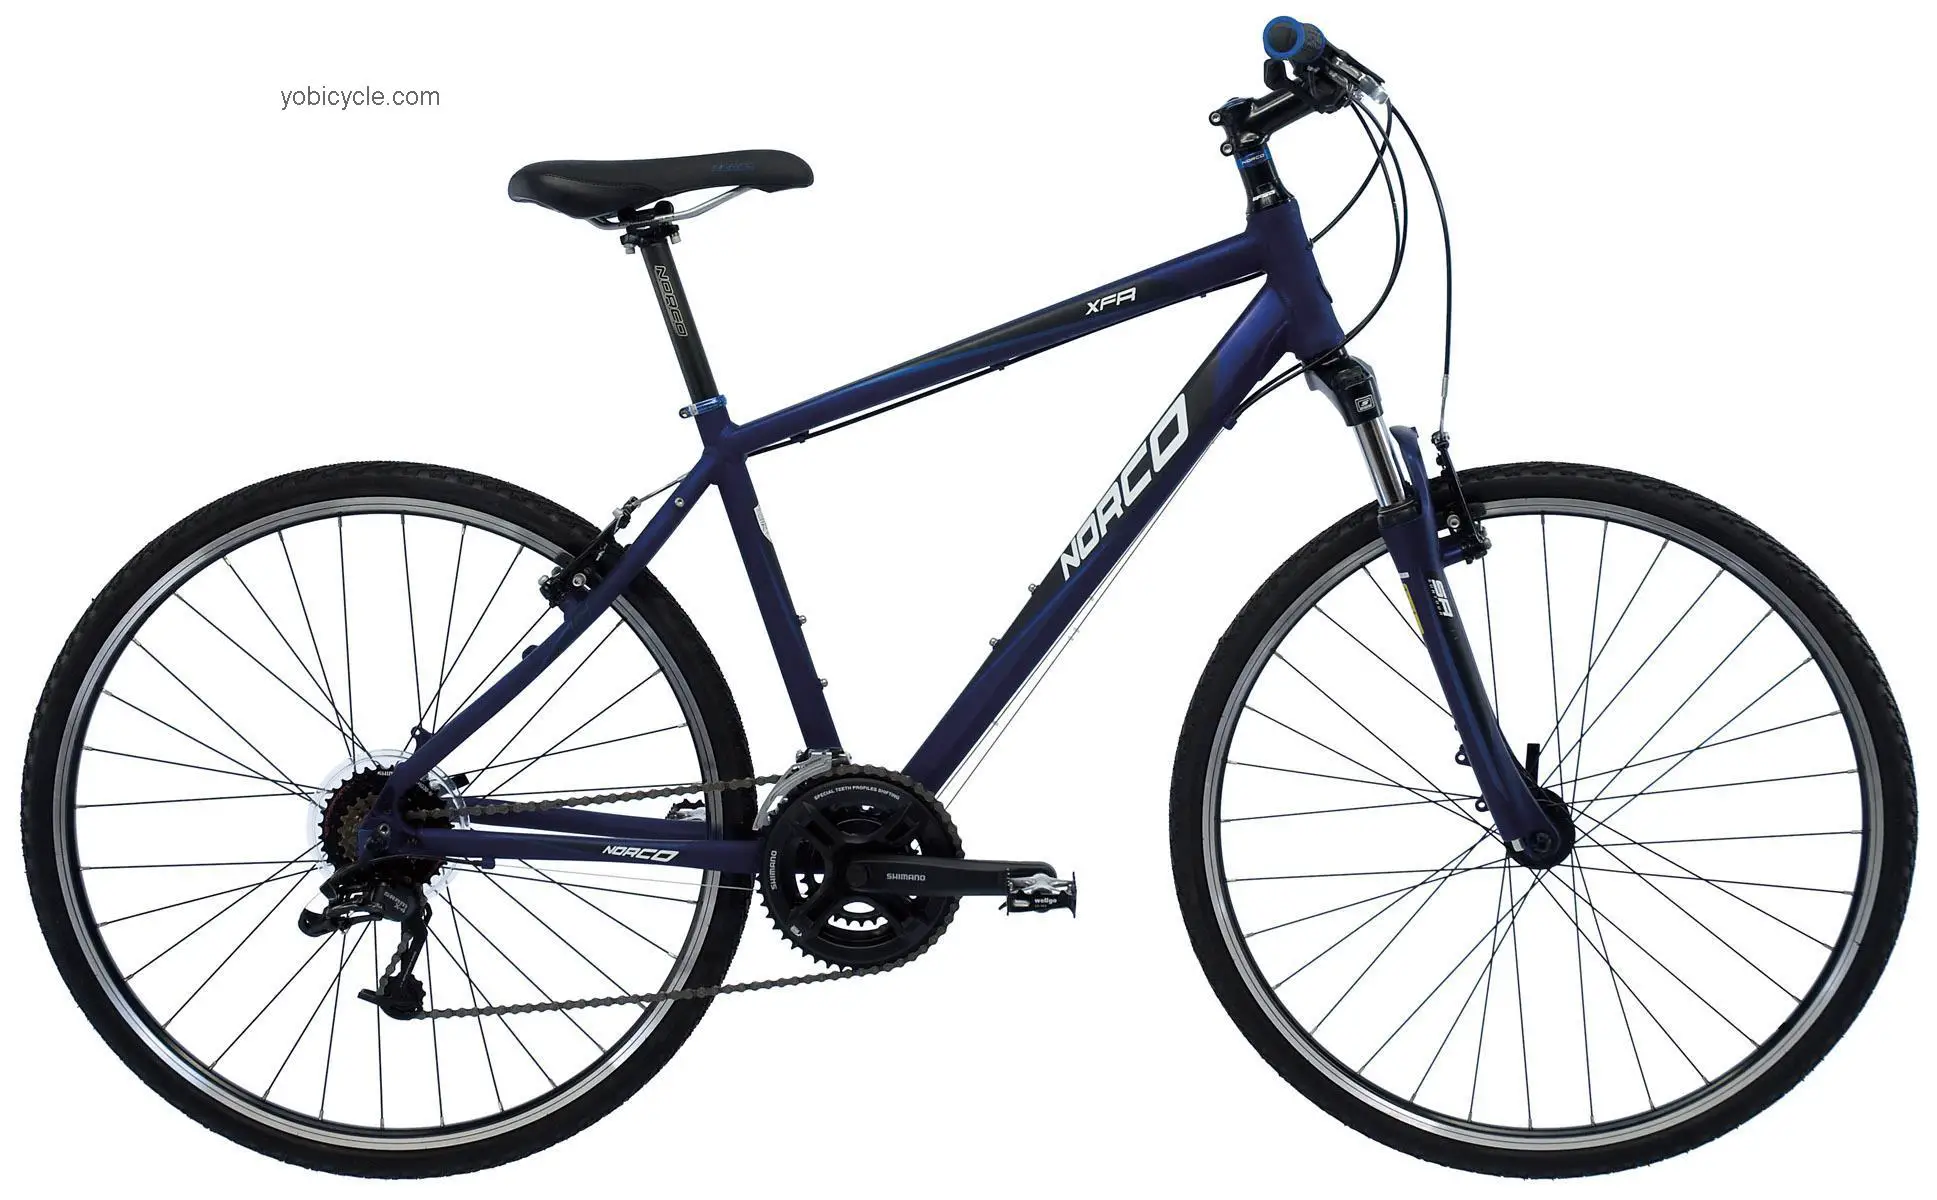 Norco XFR 4 2011 comparison online with competitors